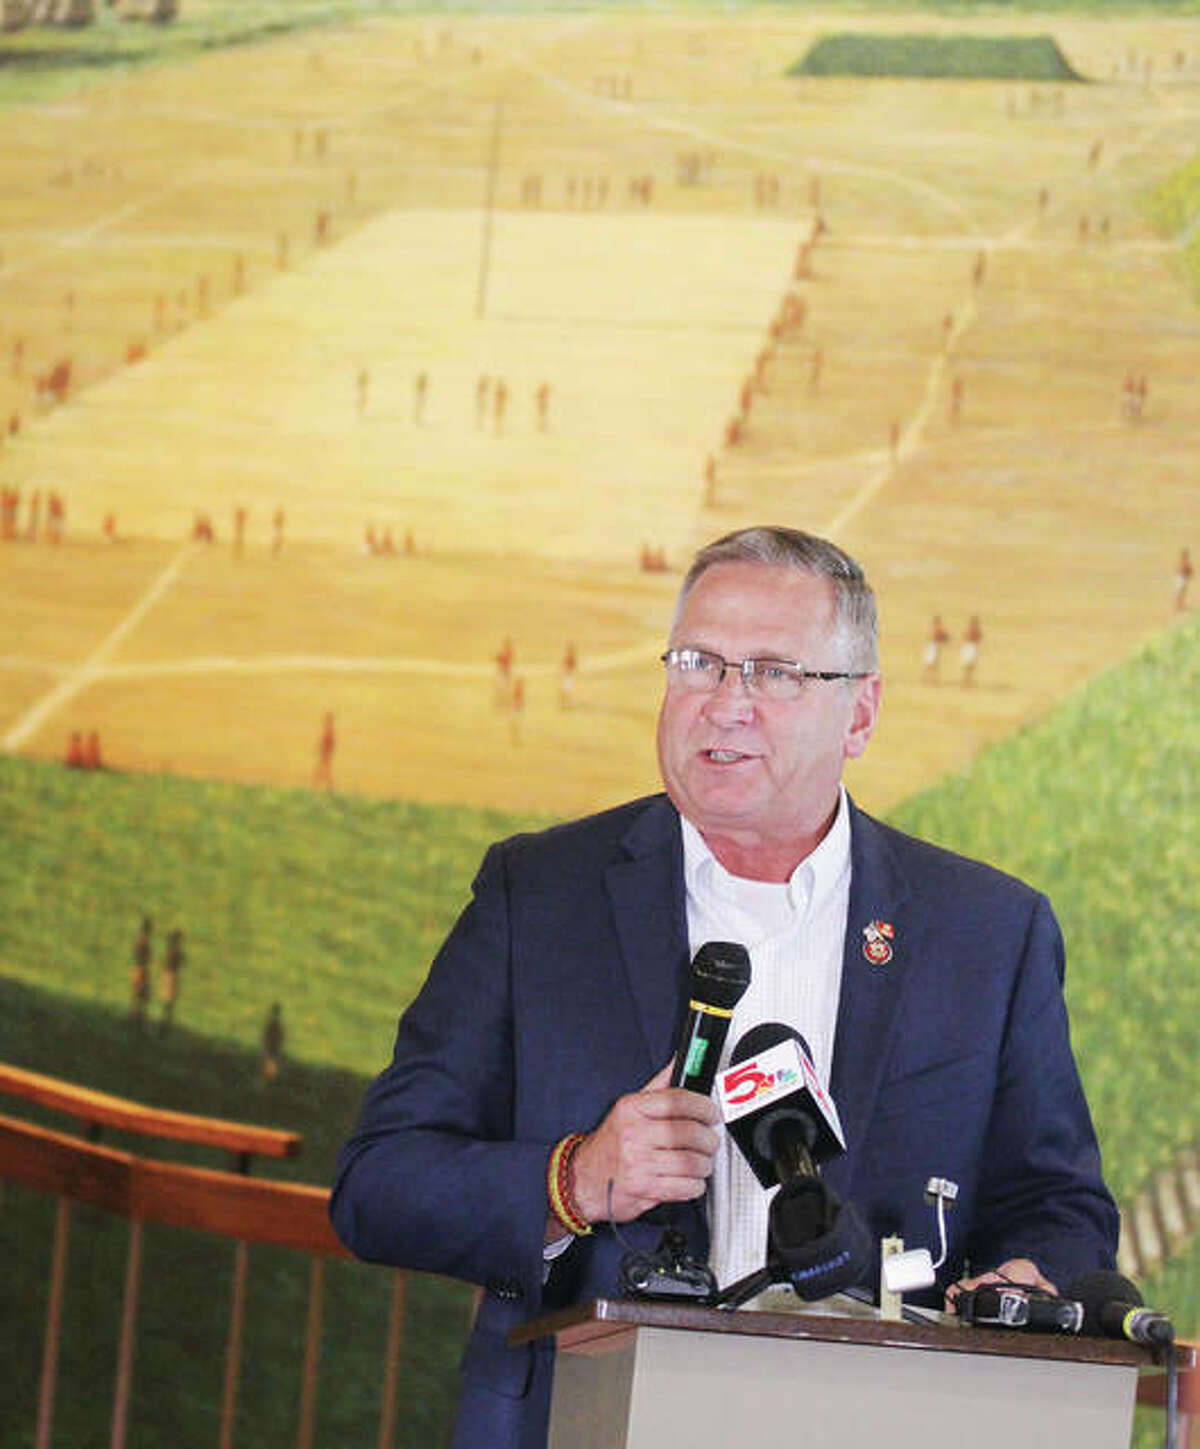 U.S. Rep. Mike Bost, R-Murphysboro, talks during a 2019 press conference at Cahokia Mounds State Historic Site in Collinsville announcing the introduction of legislation to make the Mounds part of the National Park System. The legislation did not move forward during the last Congress, and on Monday Bost and U.S. Sen. Dick Durbin, D-Illinois, announced it would be reintroduced. The mural depicts the city’s residents playing a game called Chunkey.